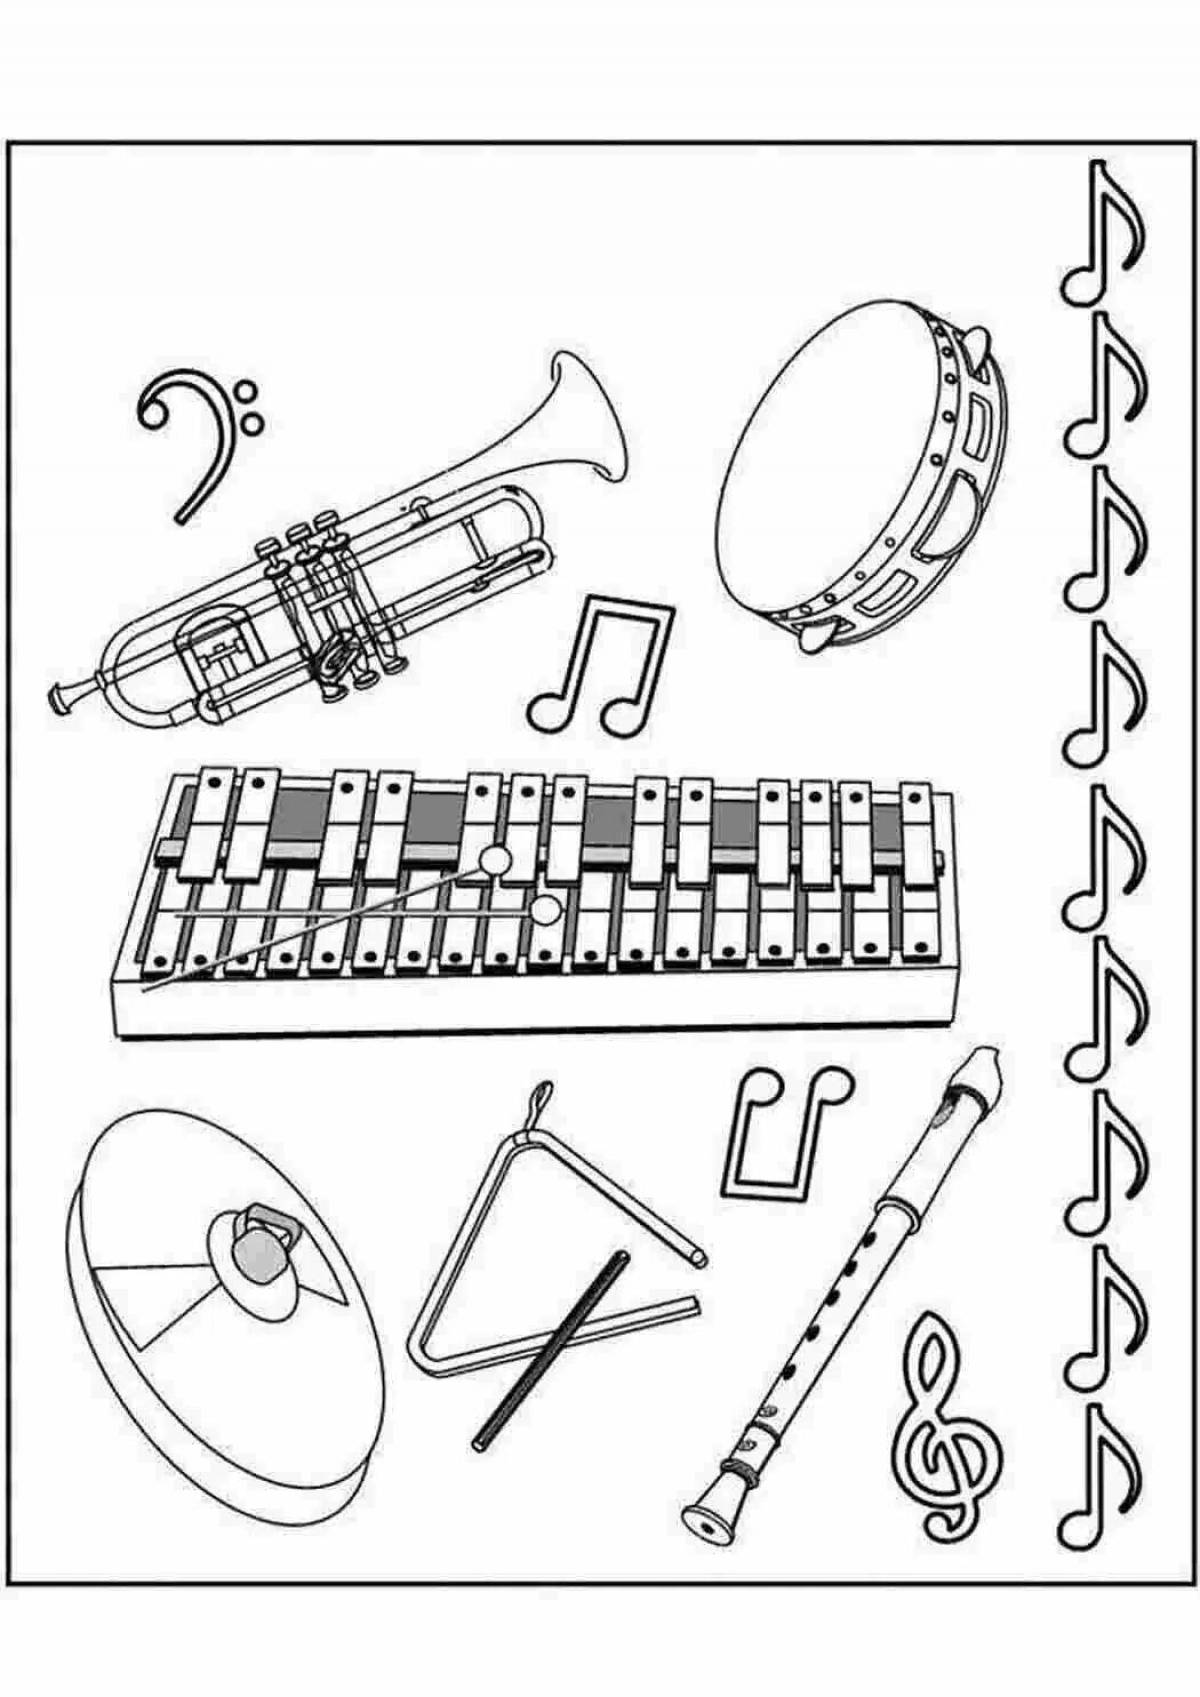 Coloring book exceptional musical instruments grade 2